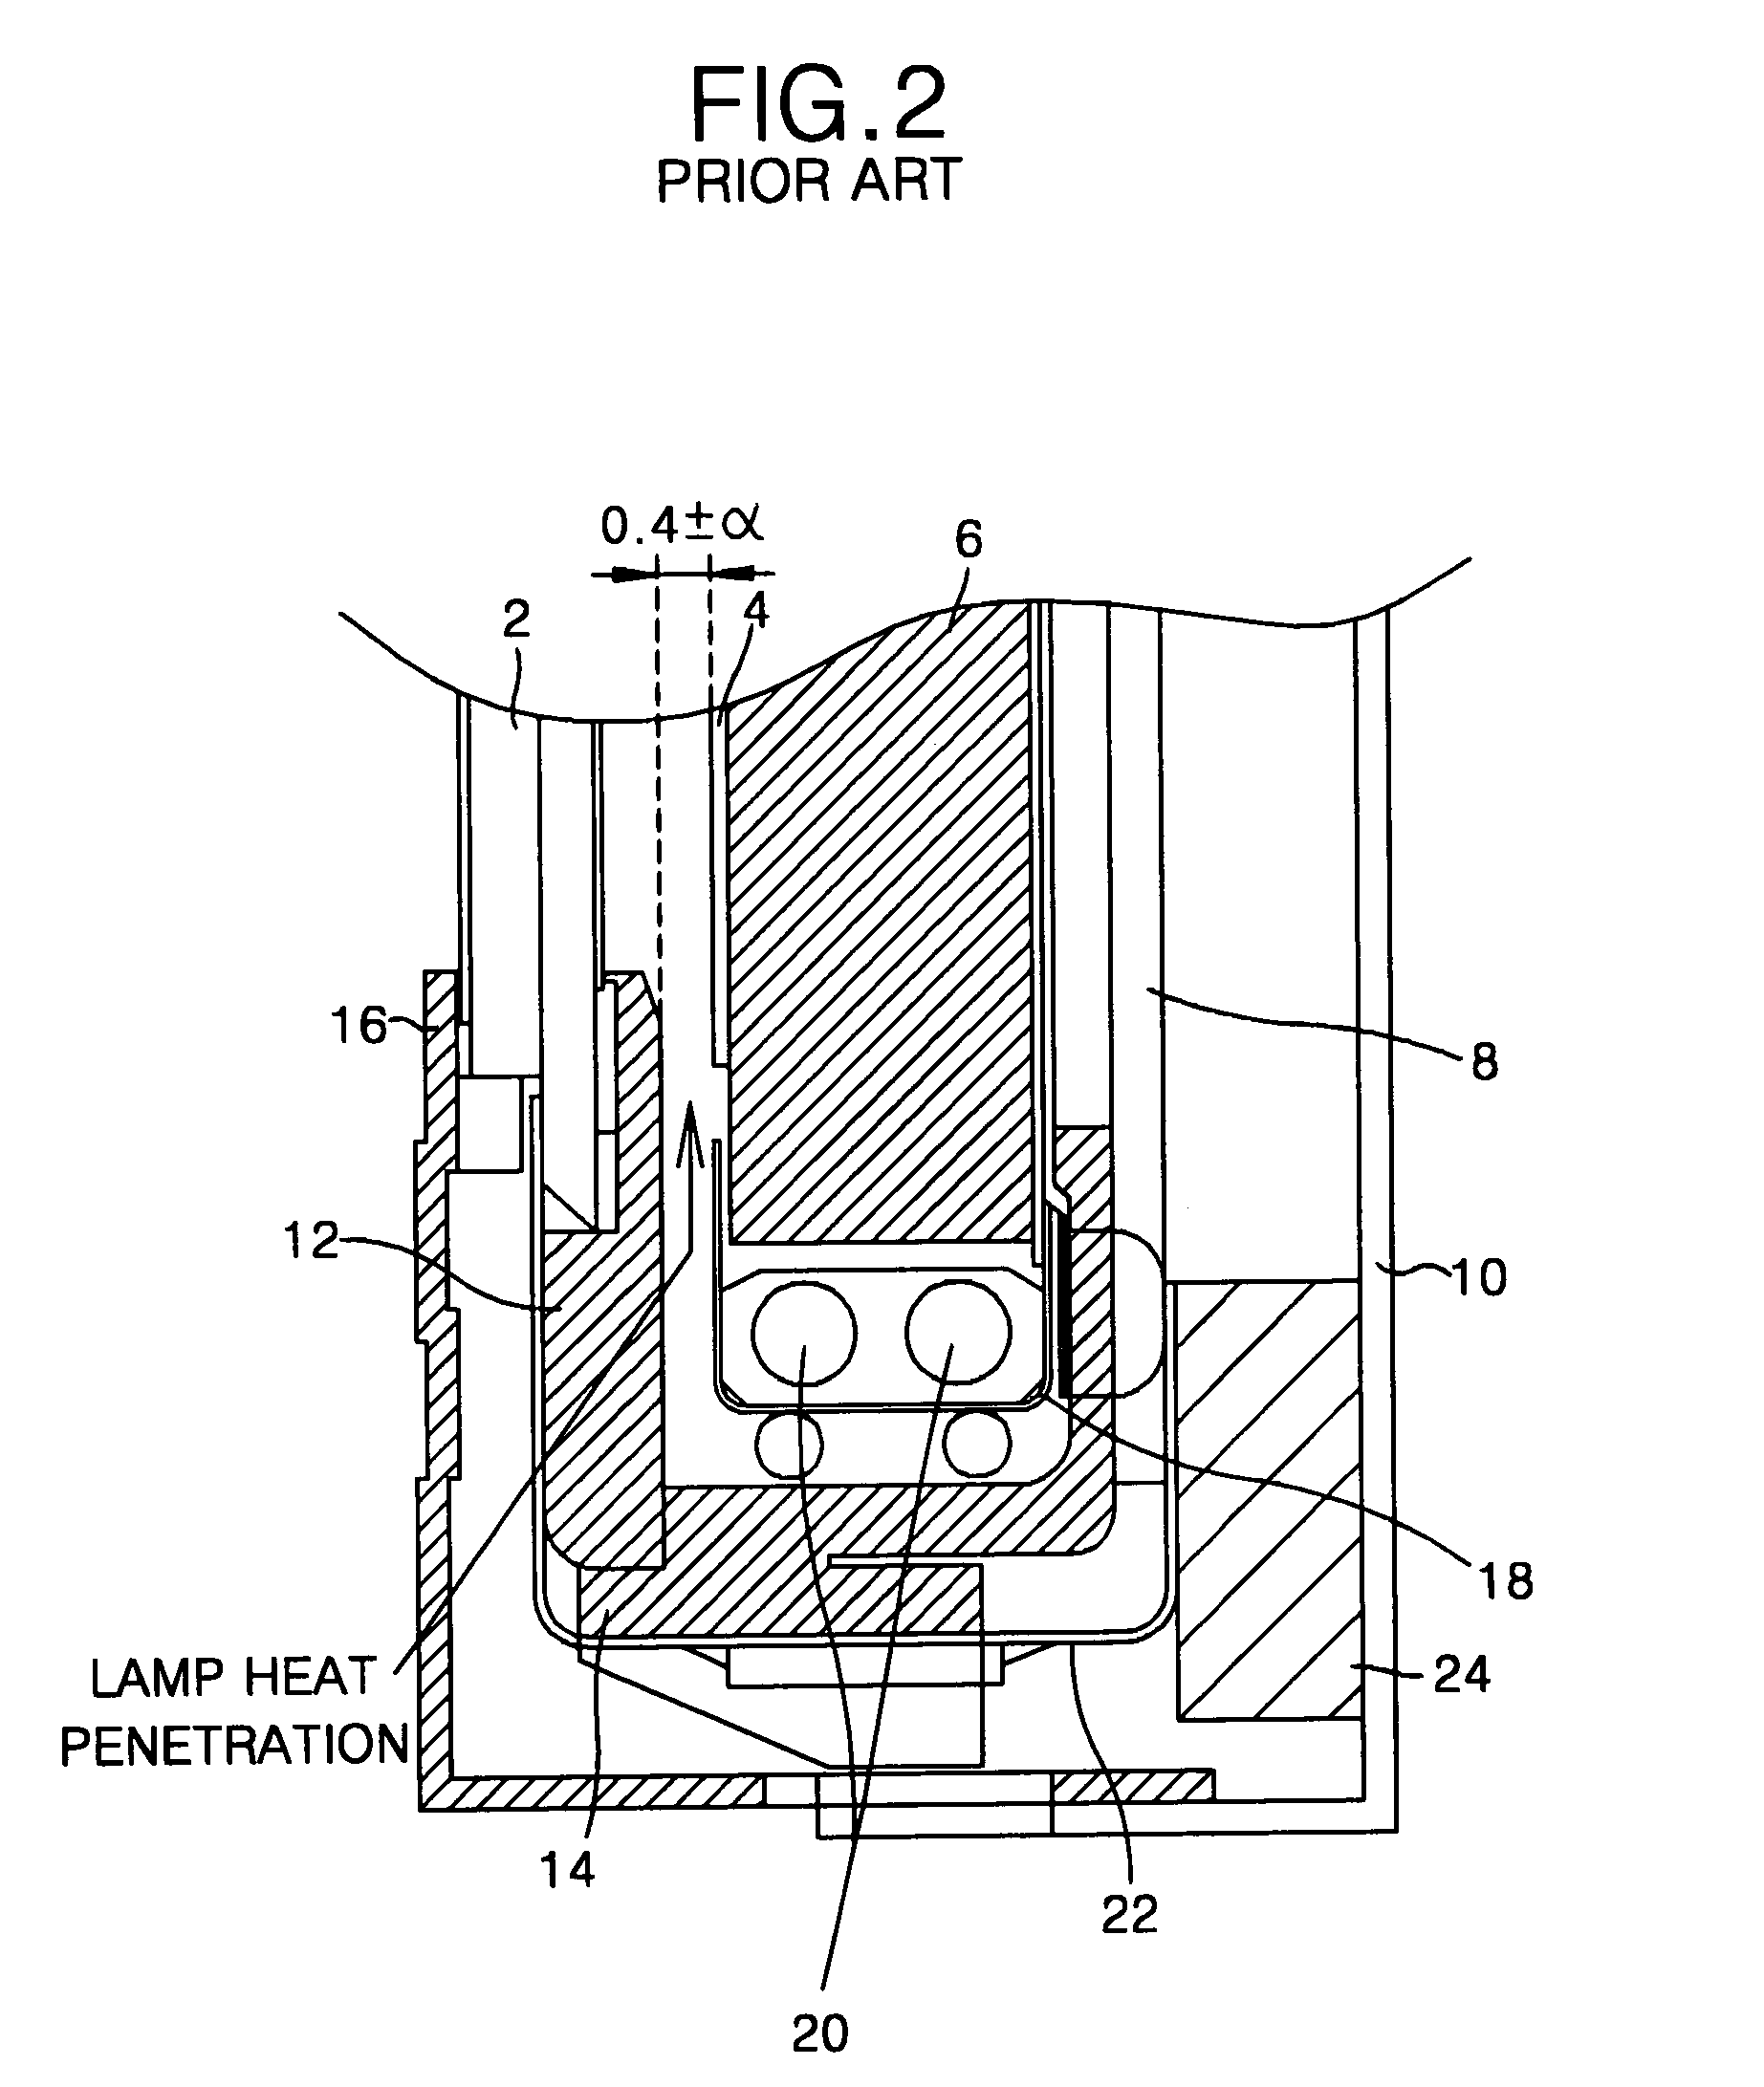 Liquid crystal display device comprising a pad in contact with a light guide and maintaining a distance between a panel guide and a backlight assembly